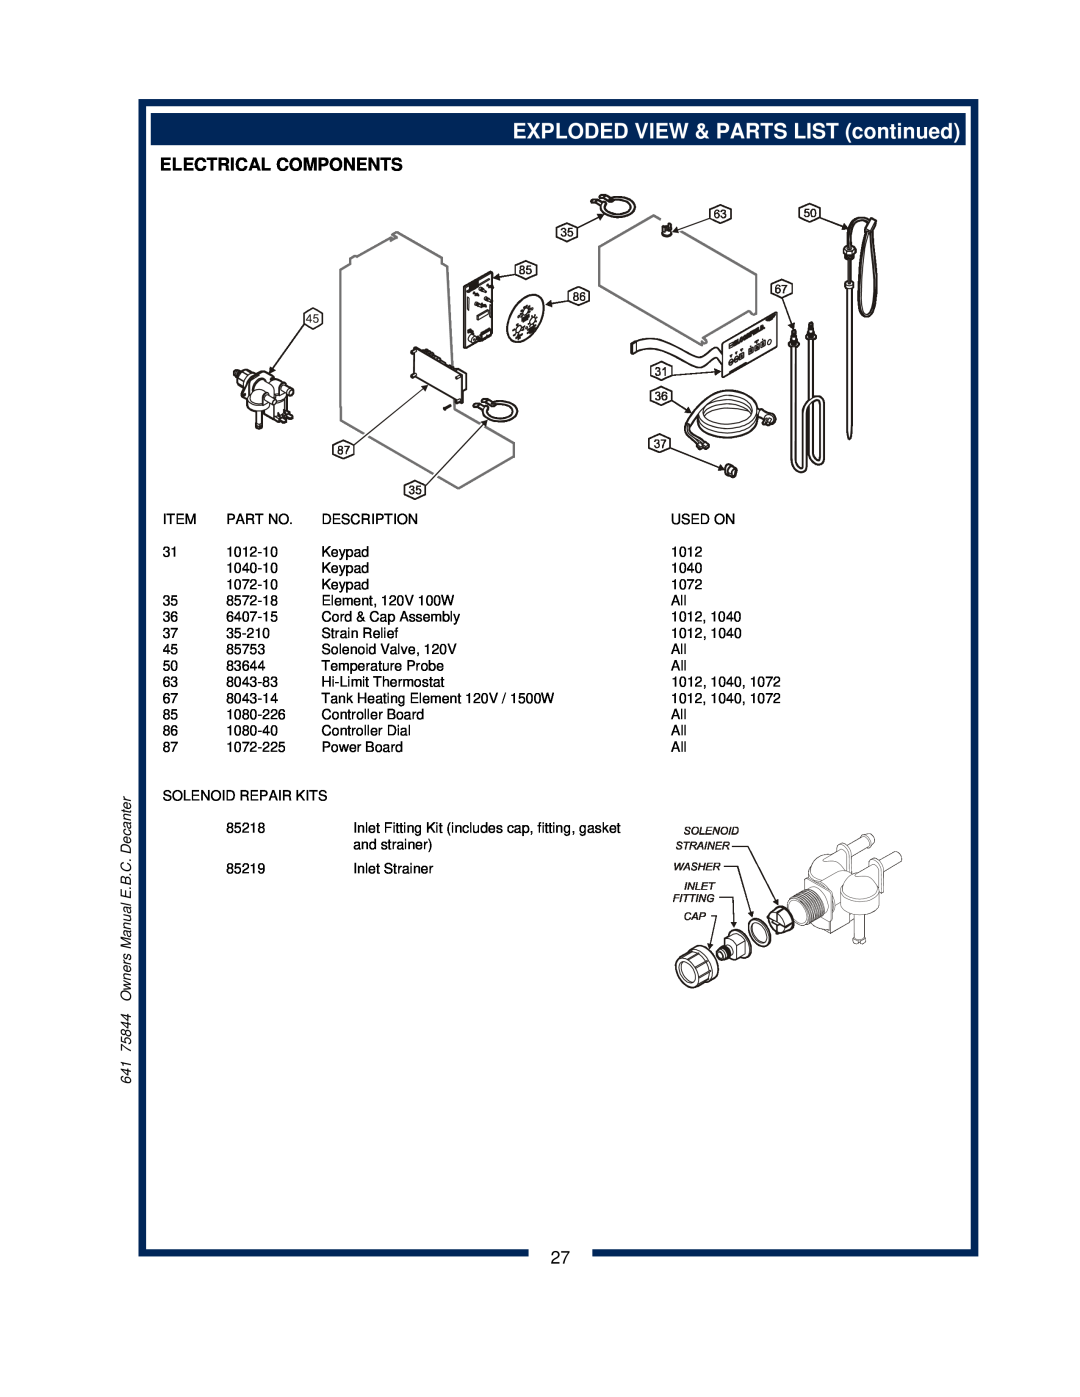 Bloomfield 1072, 1012 Electrical Components, EXPLODED VIEW & PARTS LIST continued, 641 75844 Owners Manual E.B.C. Decanter 